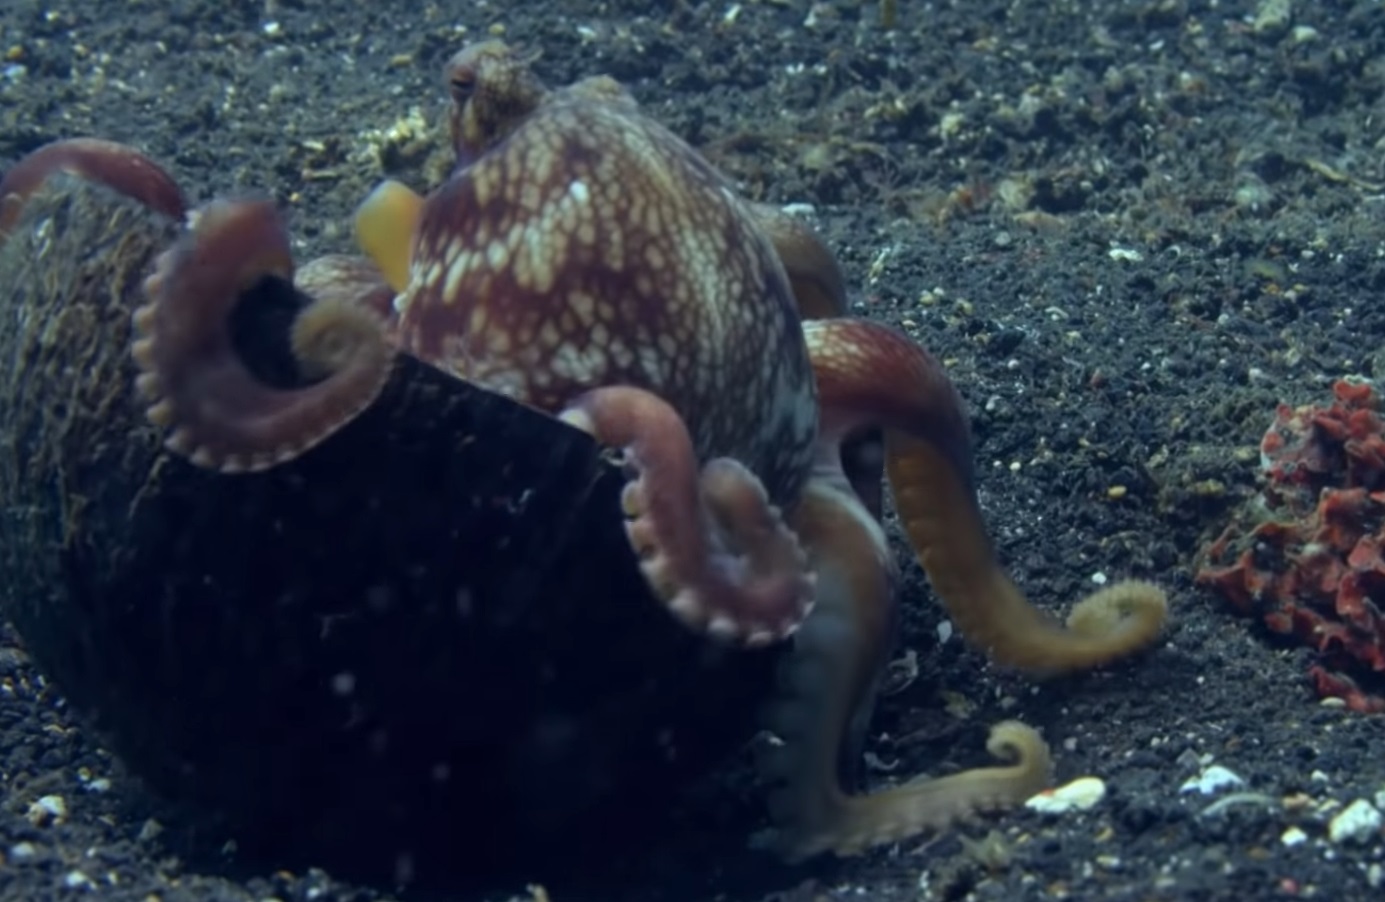 Octopus Uses Coconut As Home